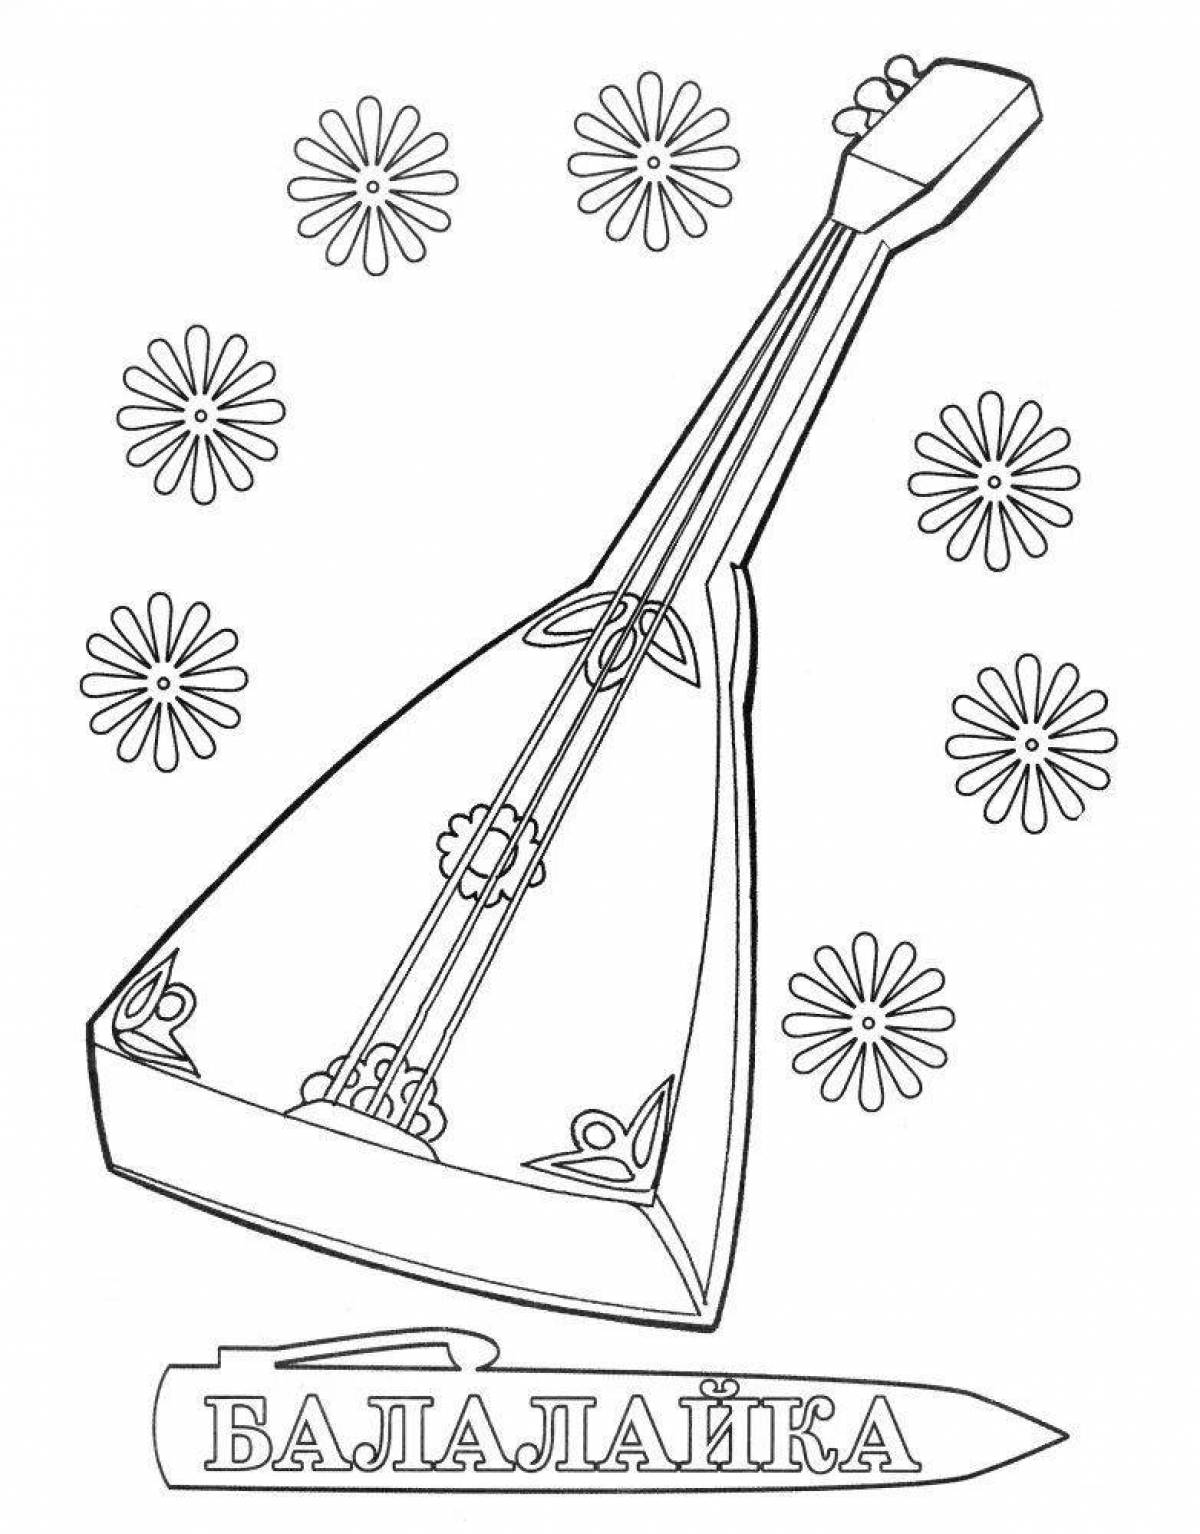 Coloring page wonderful Russian folk musical instruments